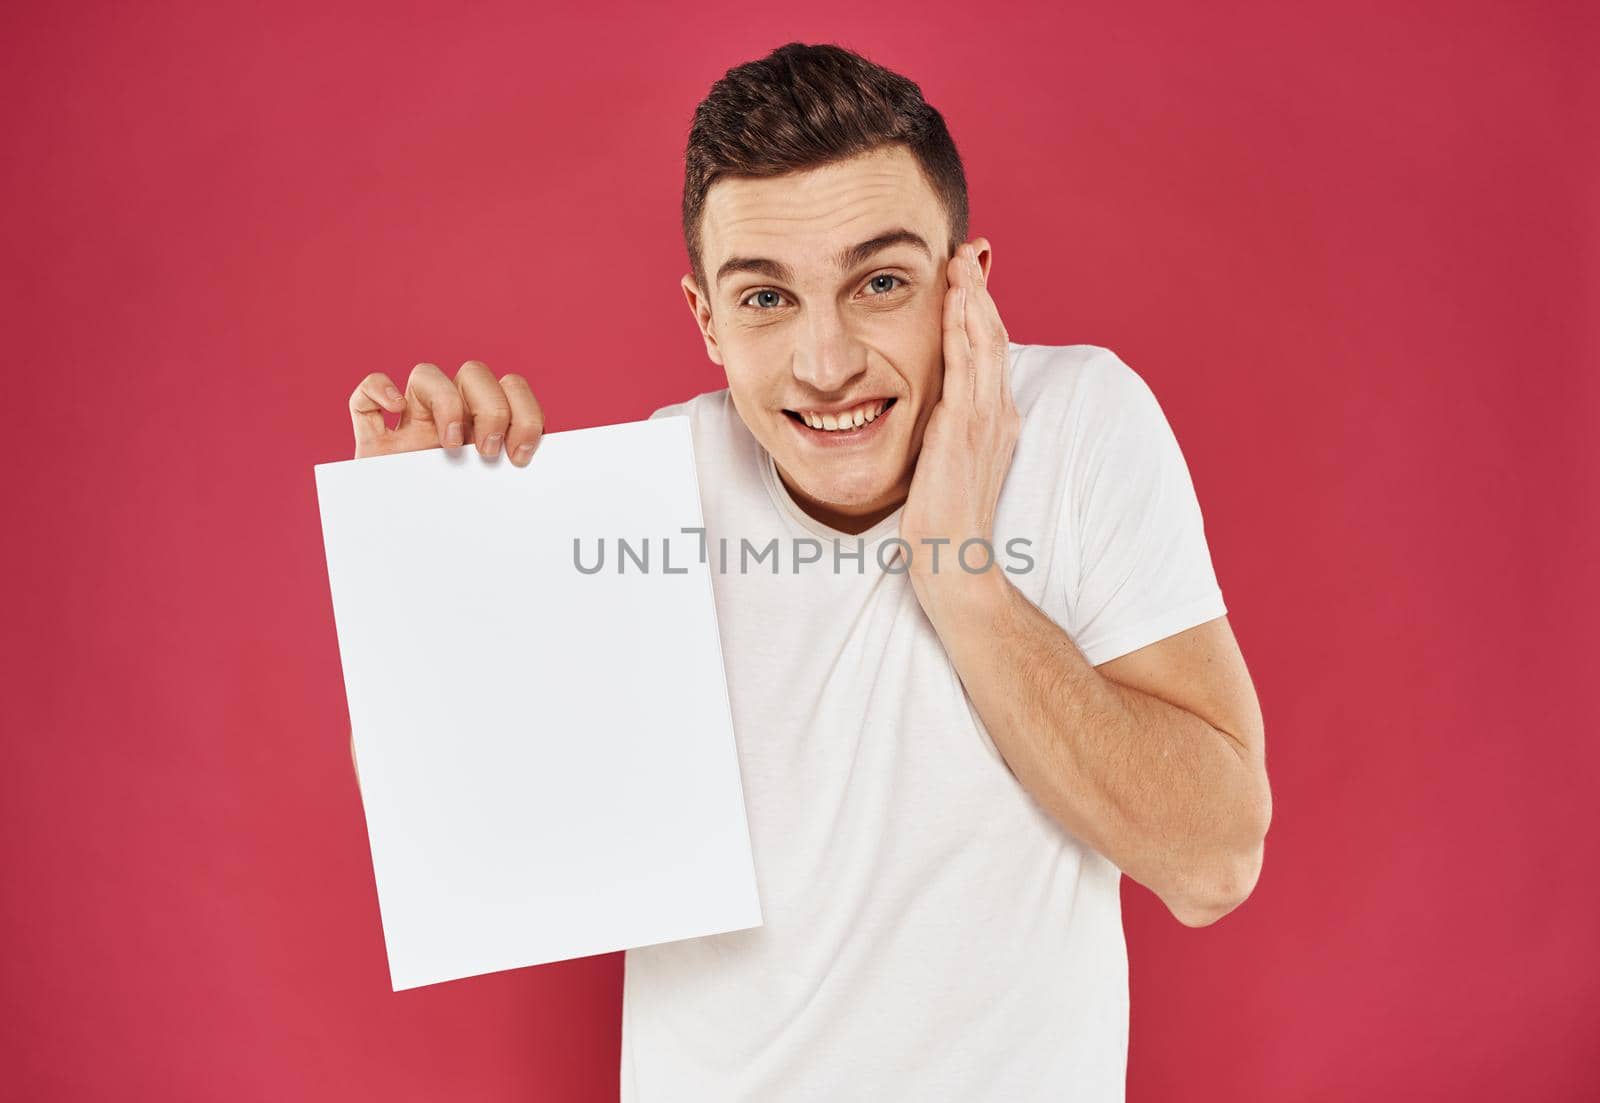 Joyful man on a red background with a white flag in his hand mock up poster. High quality photo